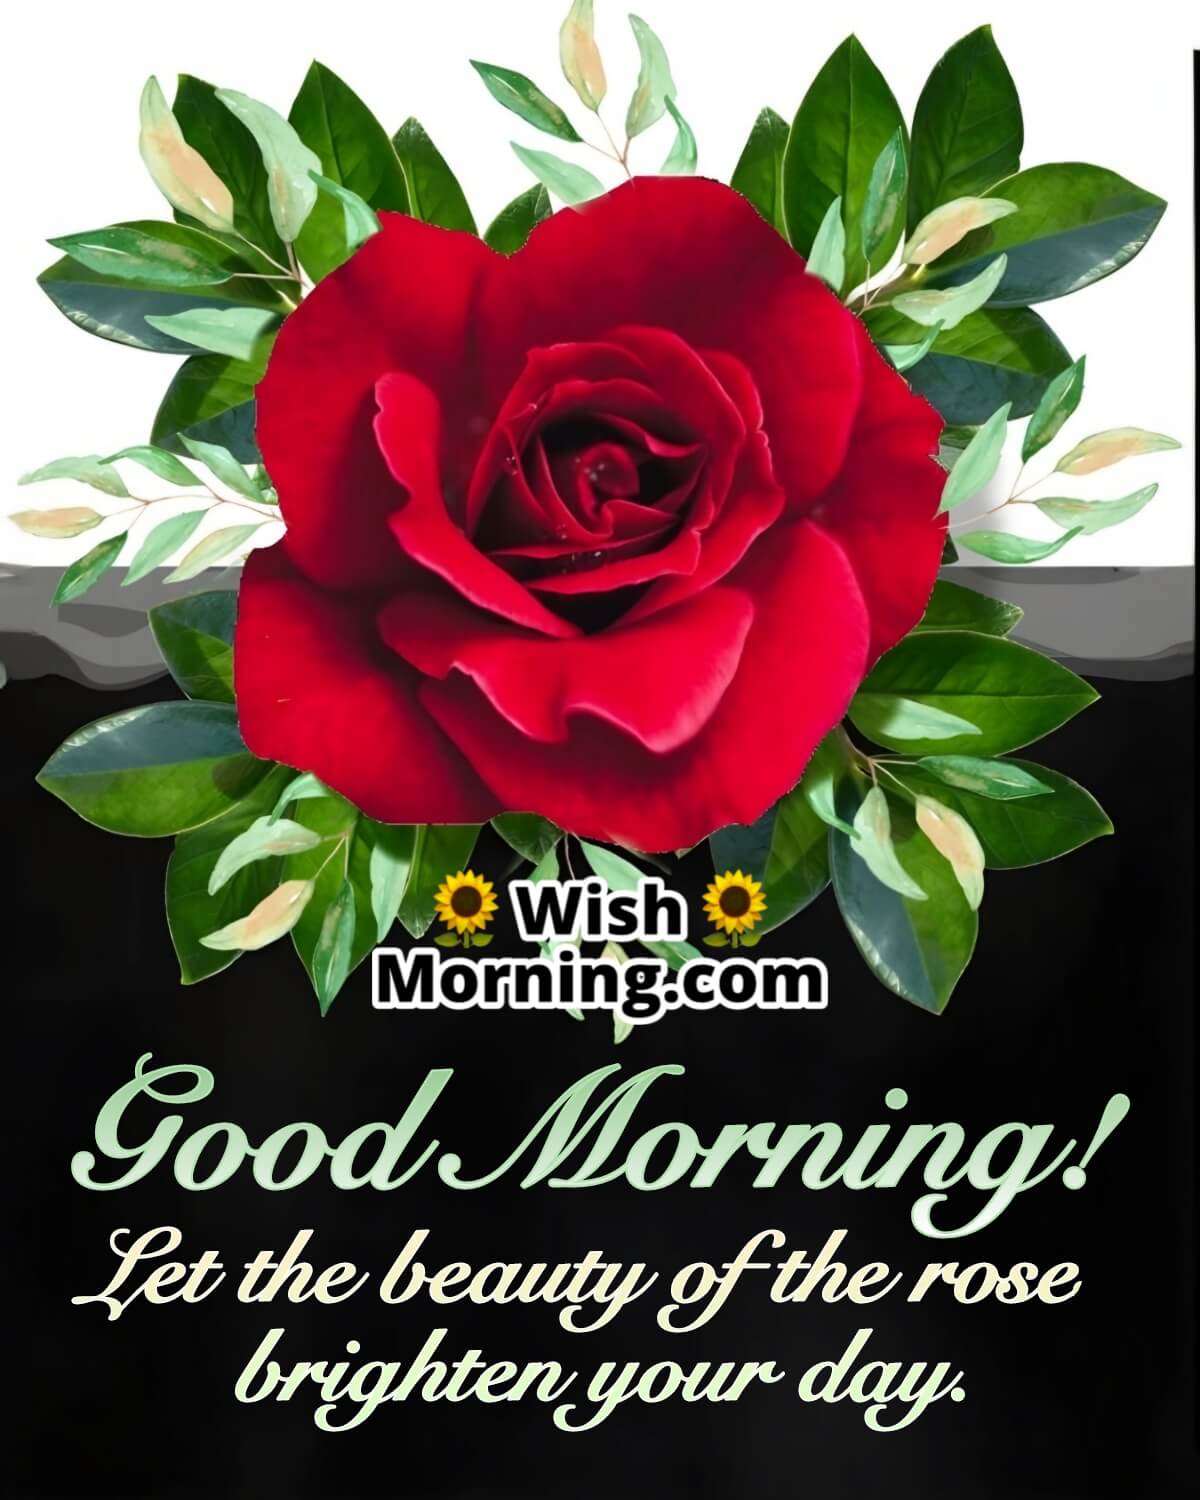 Good Morning Wish With Rose